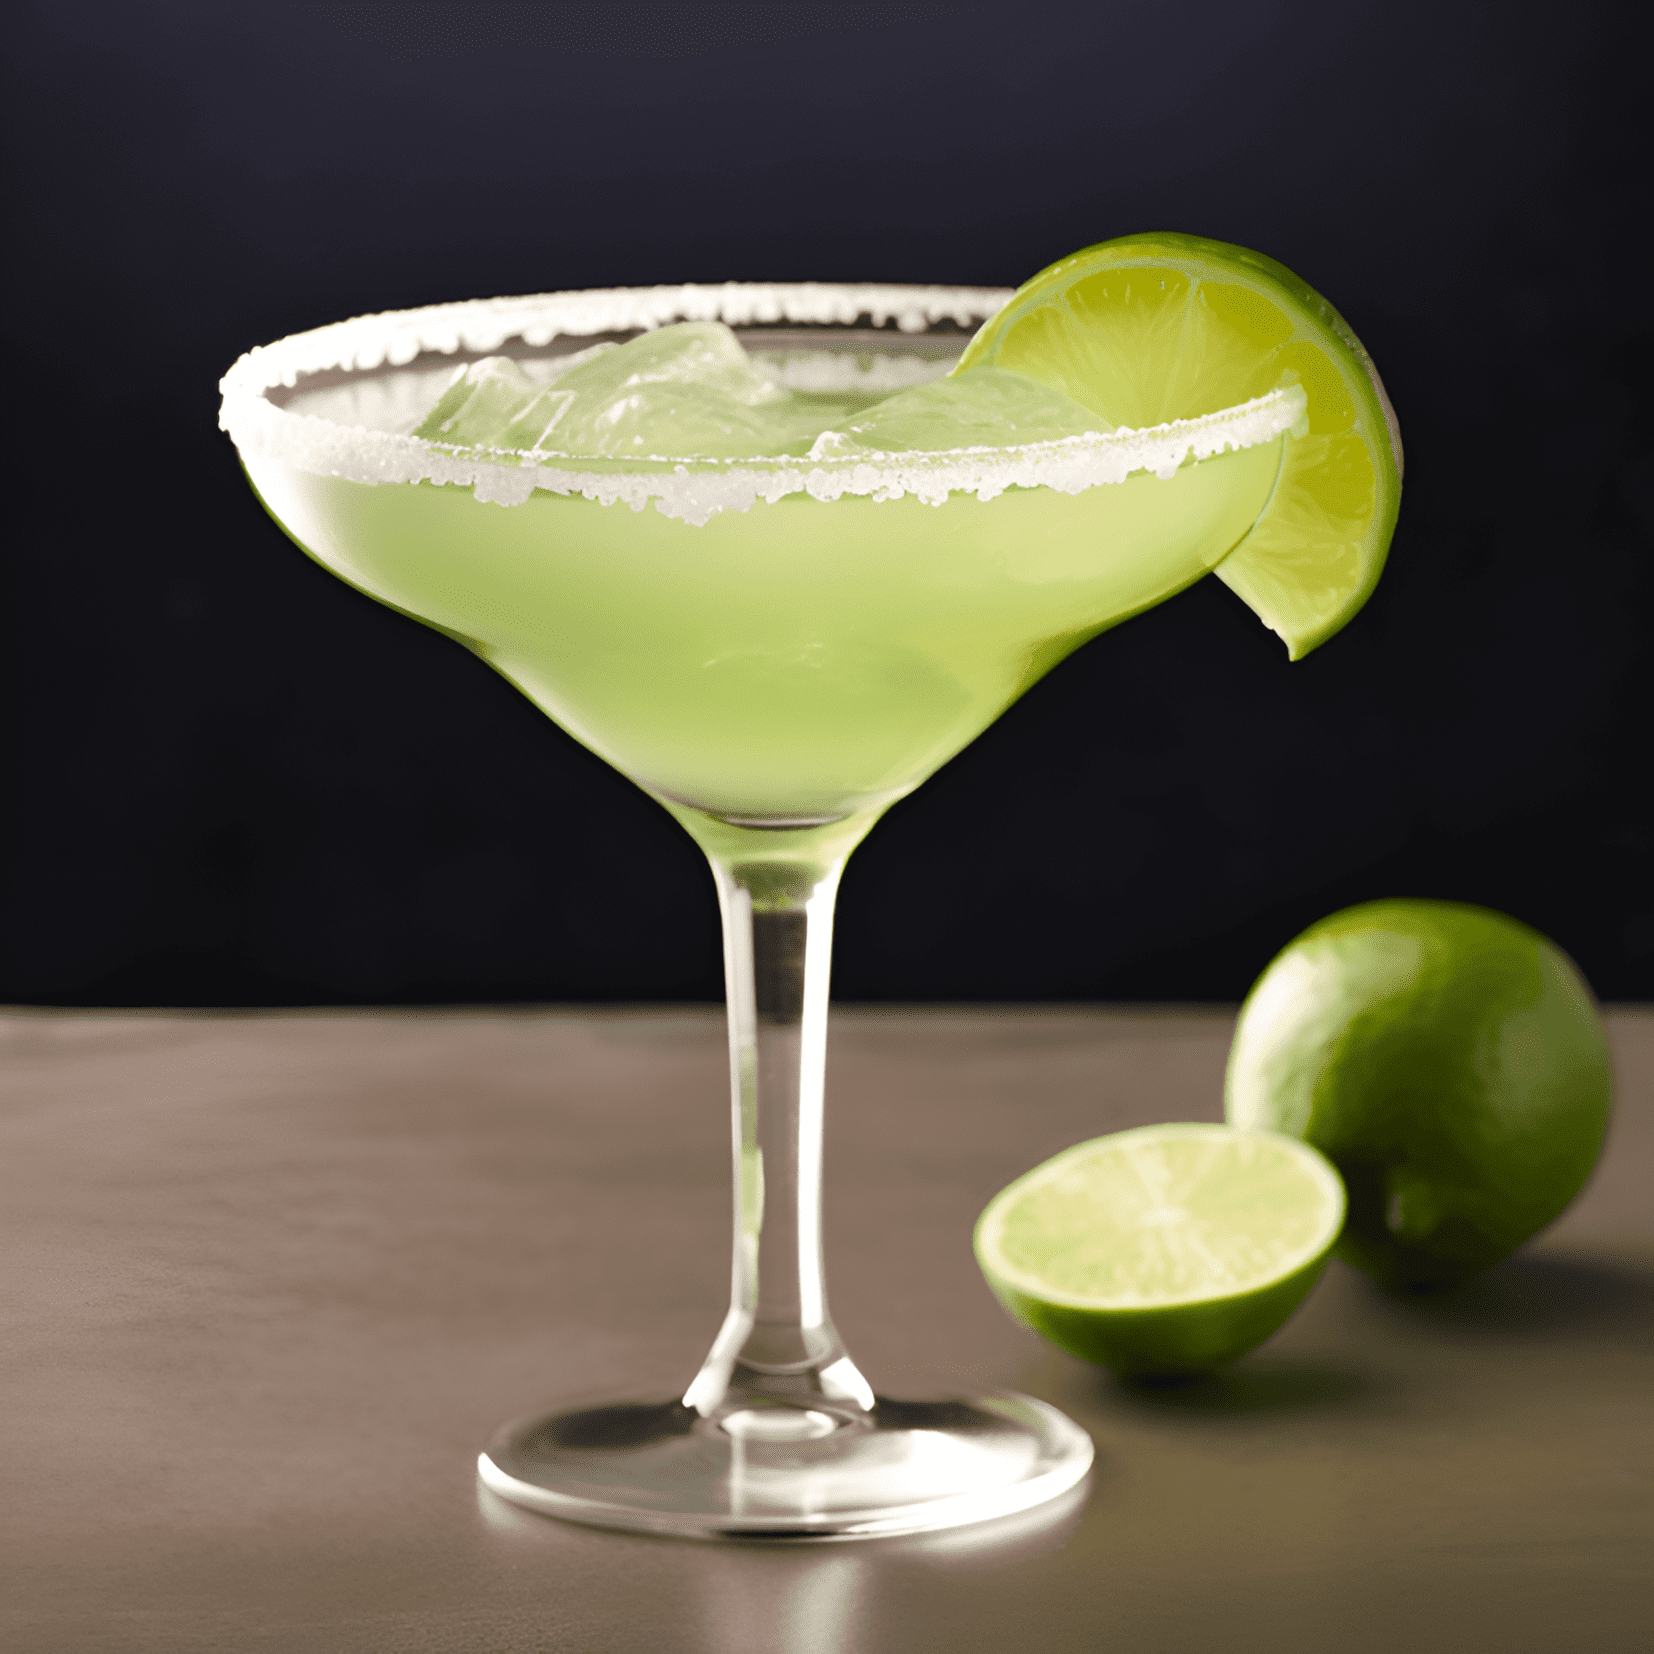 Original Margarita Cocktail Recipe - The Original Margarita is a refreshing, tangy, and slightly sweet cocktail. It has a well-balanced flavor profile, with the tartness of lime juice complementing the sweetness of the orange liqueur and the earthy, peppery notes of the tequila.